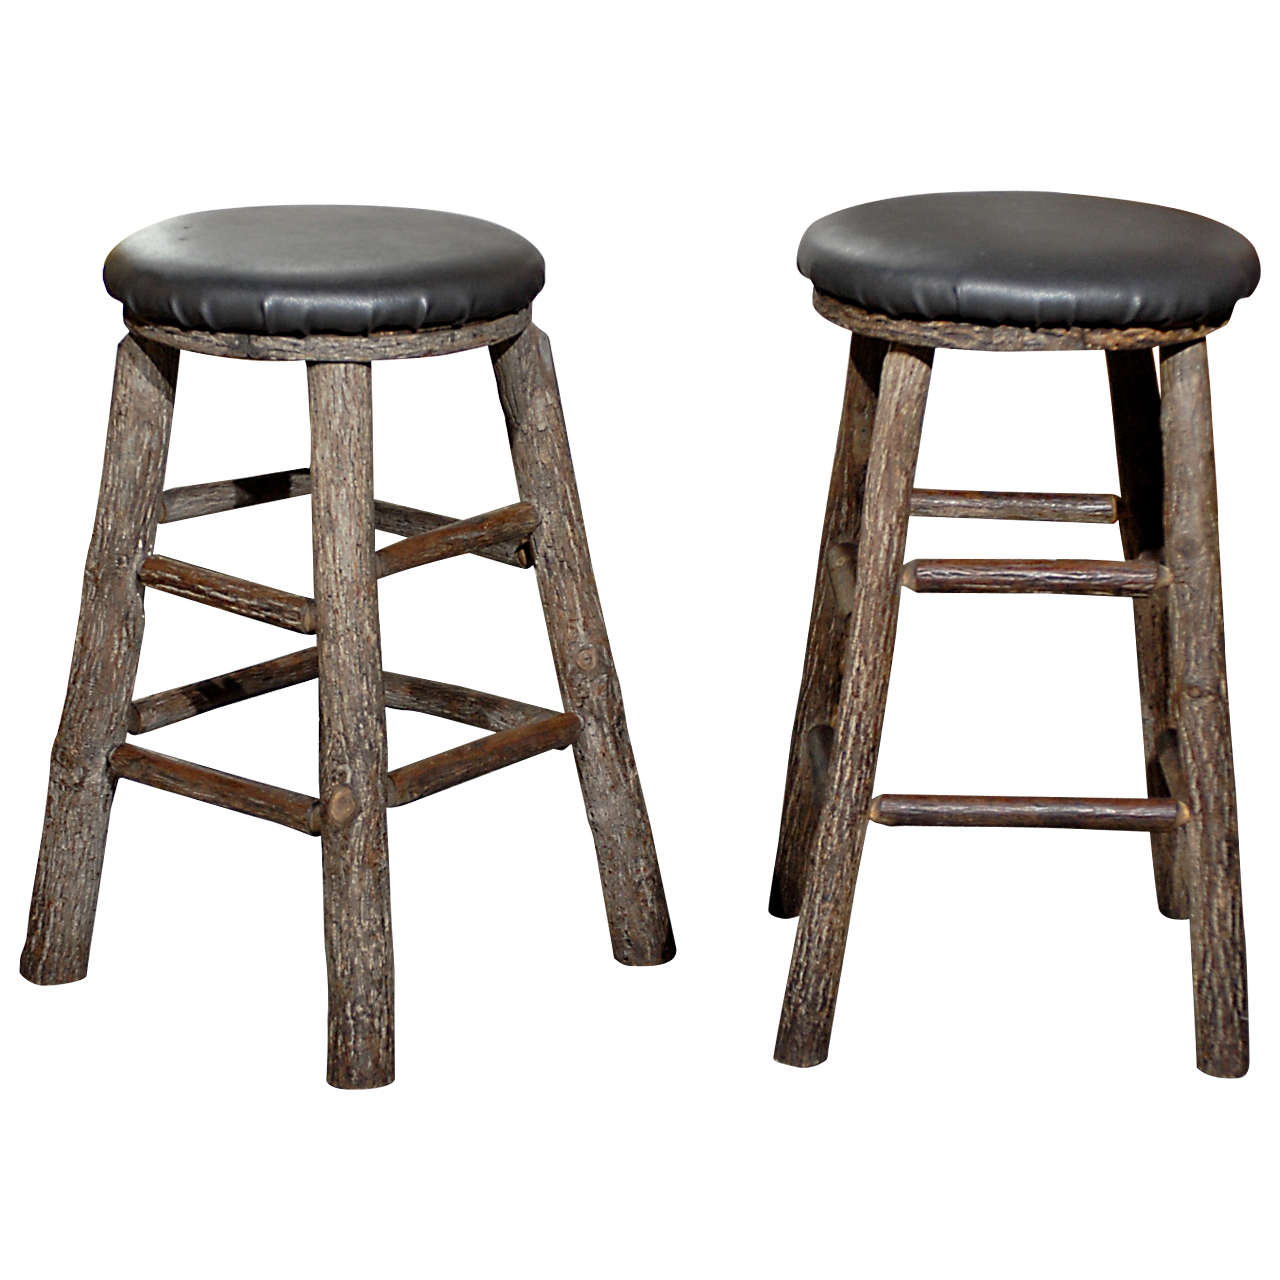 10 Round Rustic Vintage Bar Stools with Tree Logs Legs from the 20th Century For Sale